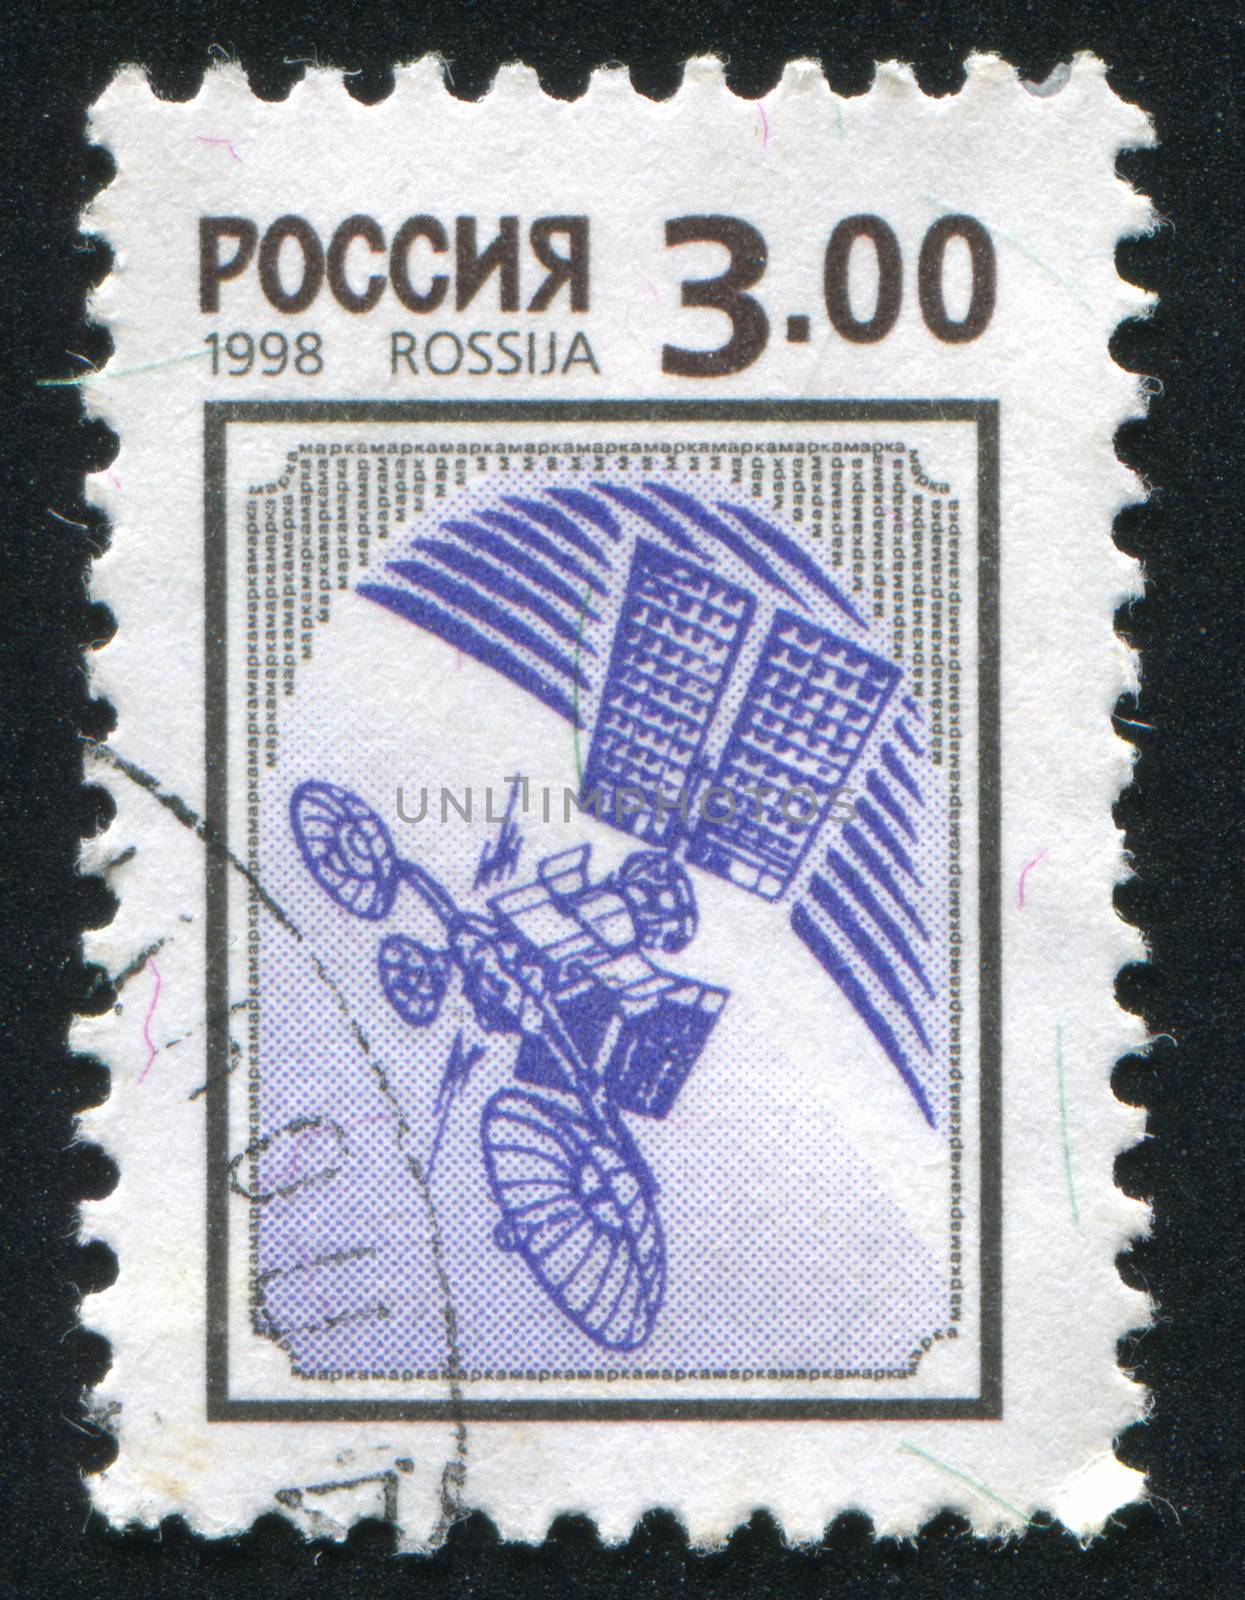 Communication Satellite by rook